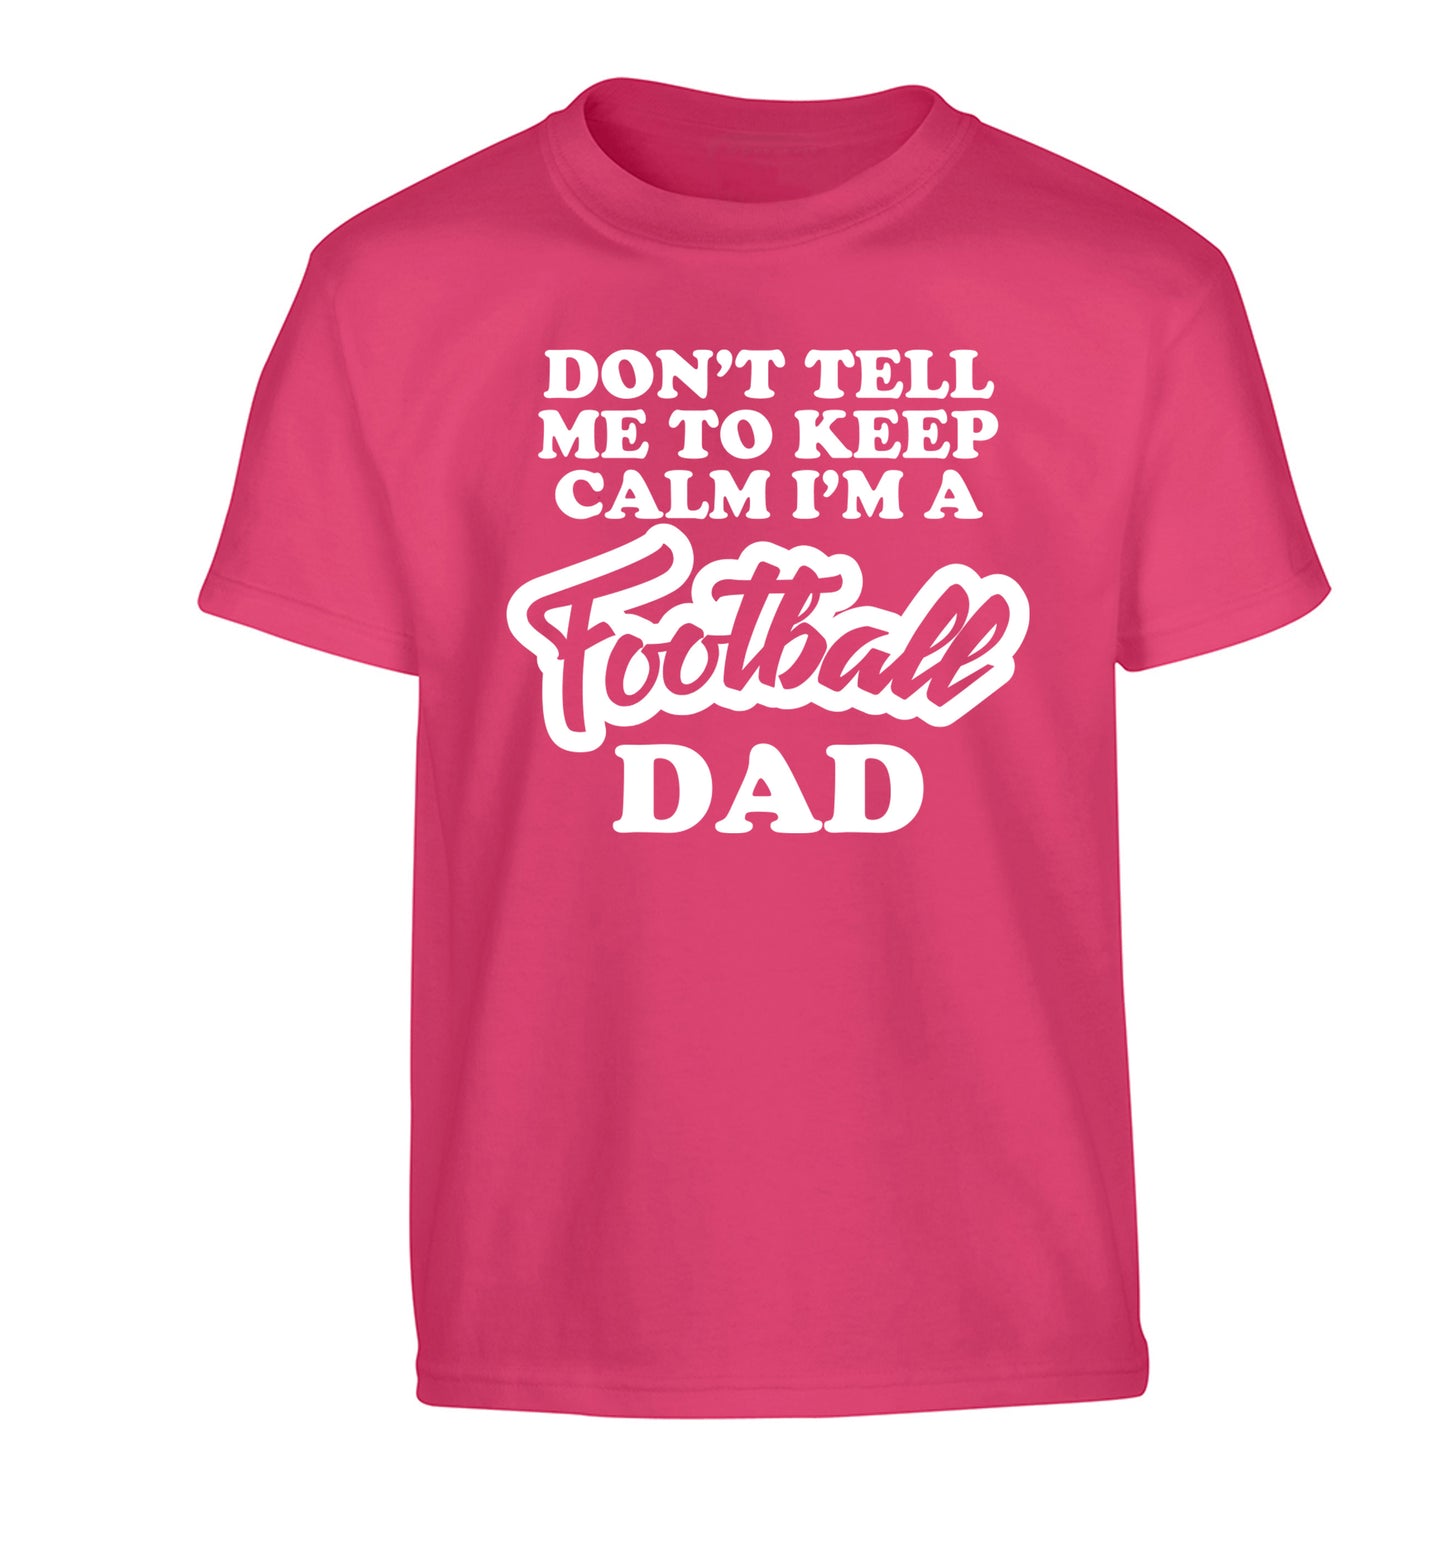 Don't tell me to keep calm I'm a football dad Children's pink Tshirt 12-14 Years